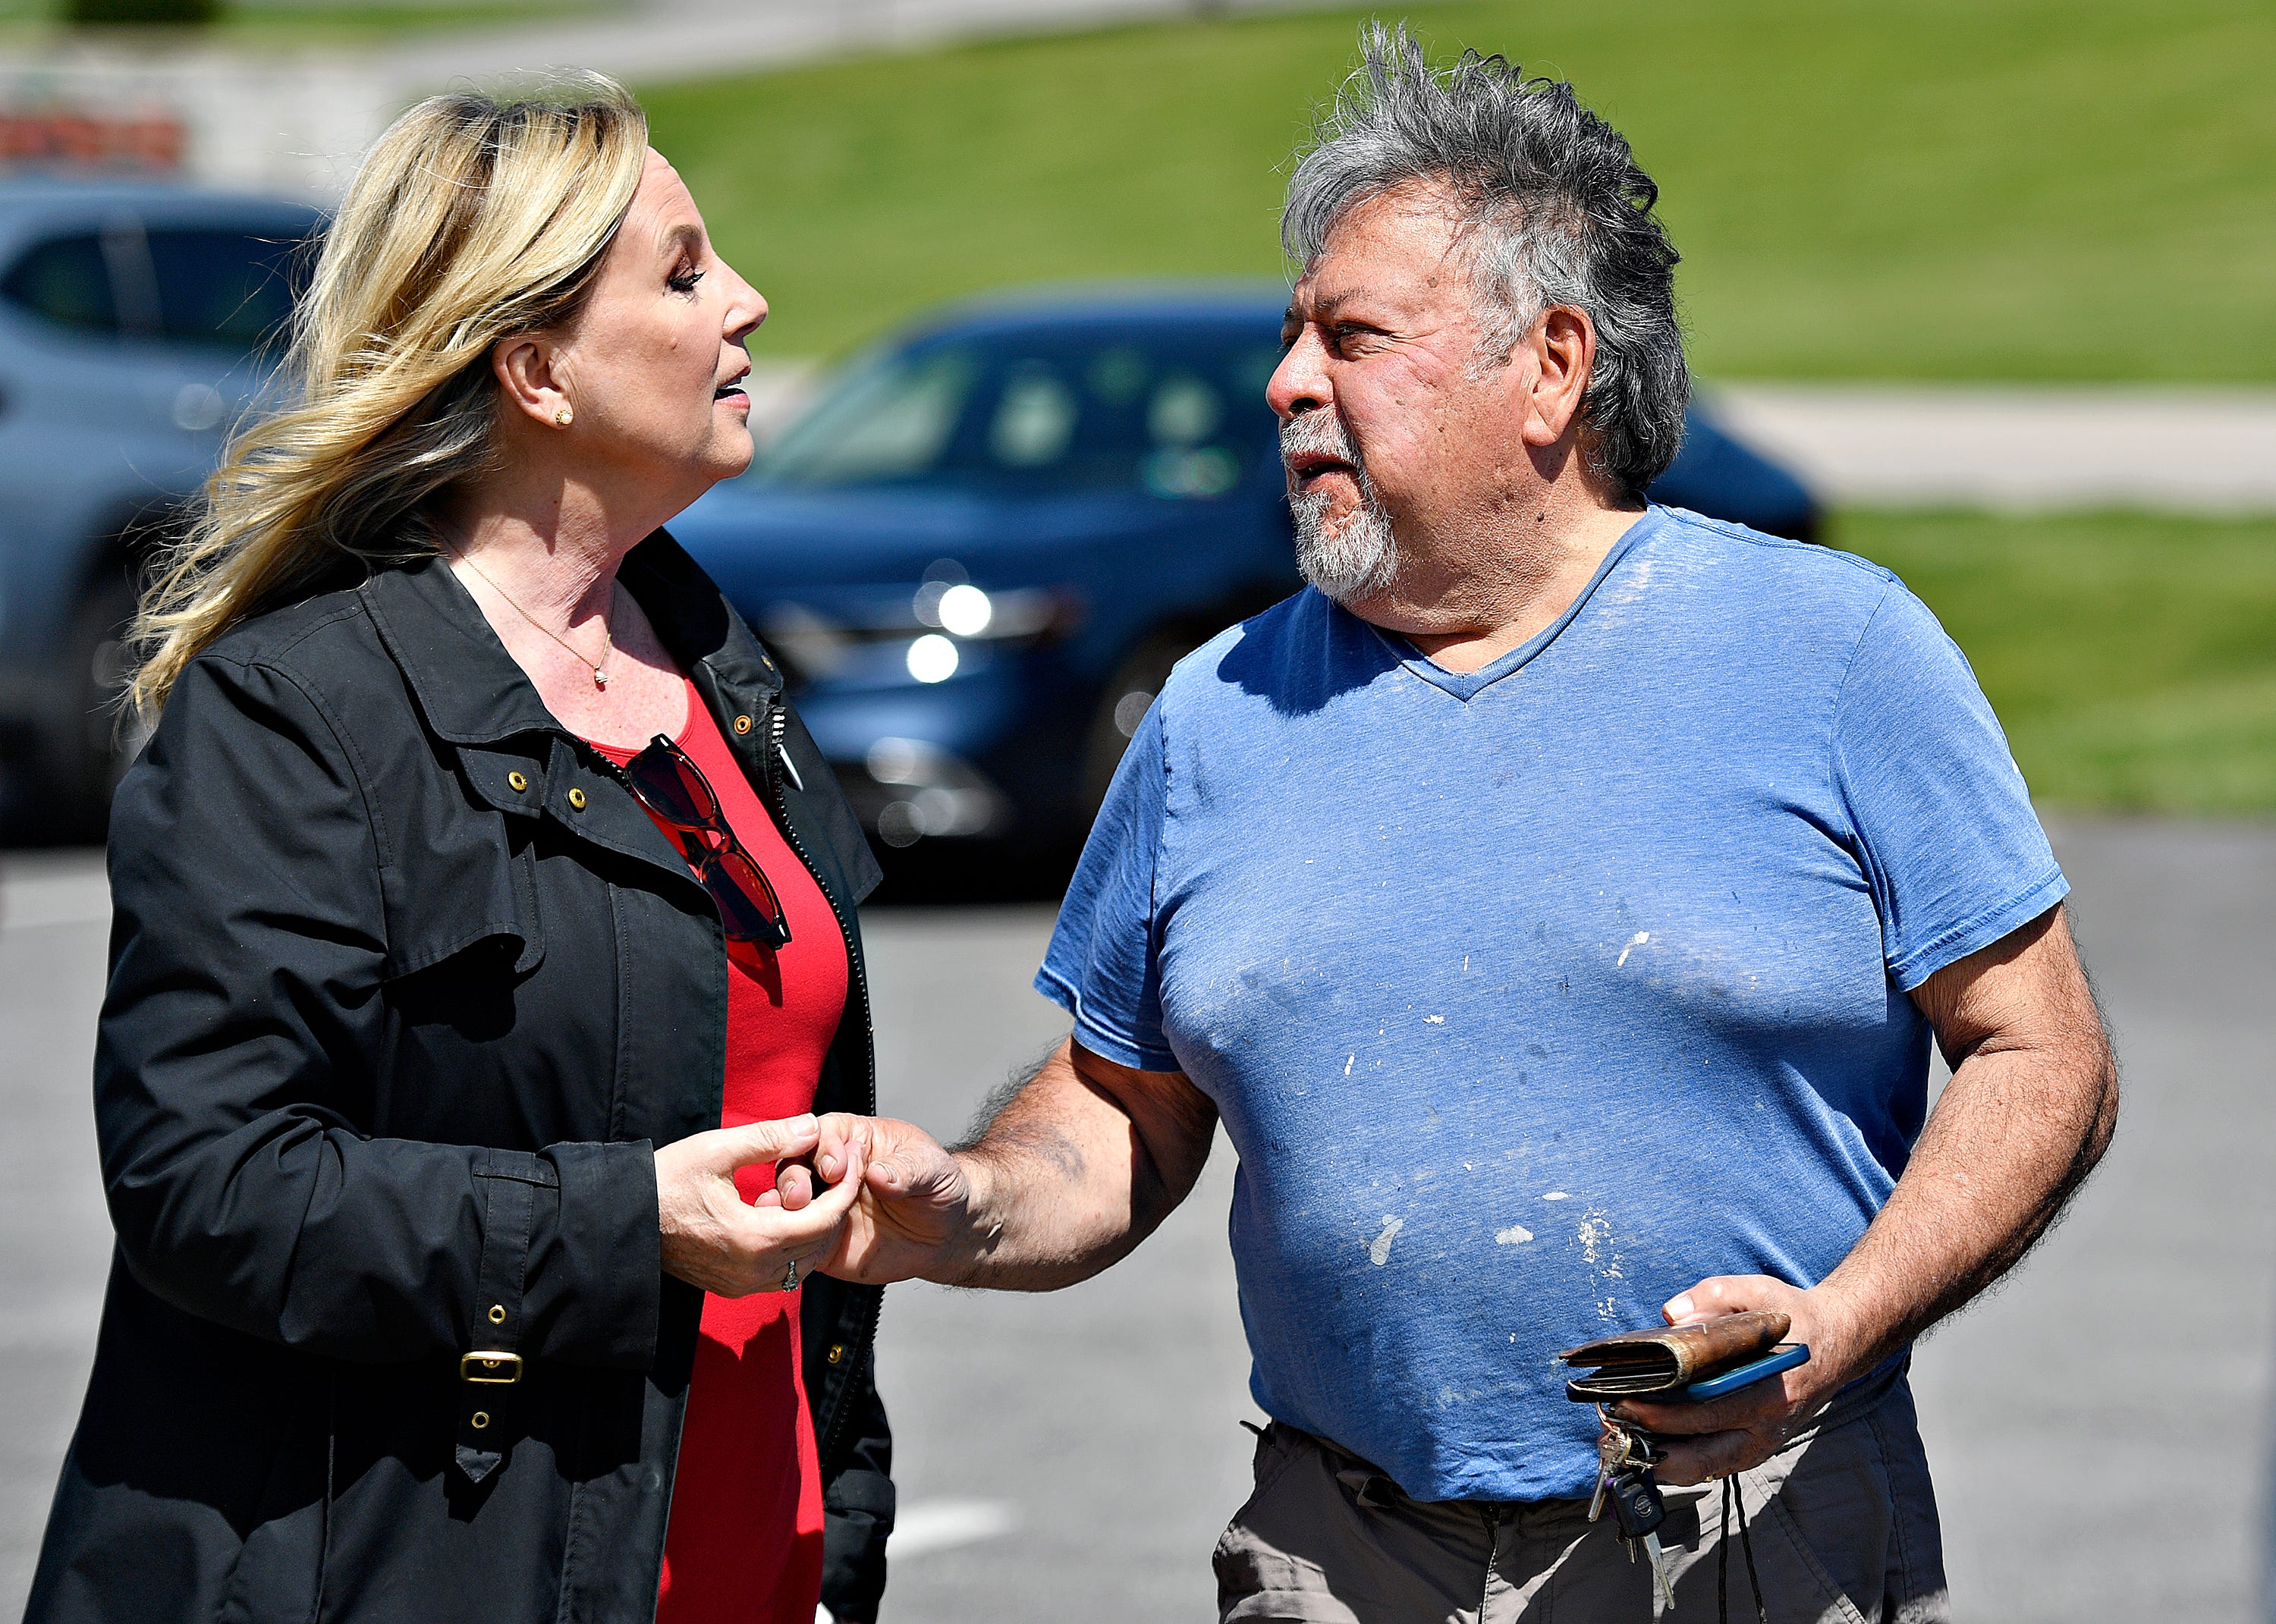 Janelle Stelson, Democratic candidate for the 10th Congressional District, left, greets voter Dennis Carrington, of Manchester Township, as he arrives just after work to cast his vote at the Manchester Township Building during Primary Election Day in Manchester Township, Tuesday, April 23, 2024. (Dawn J. Sagert/The York Dispatch)